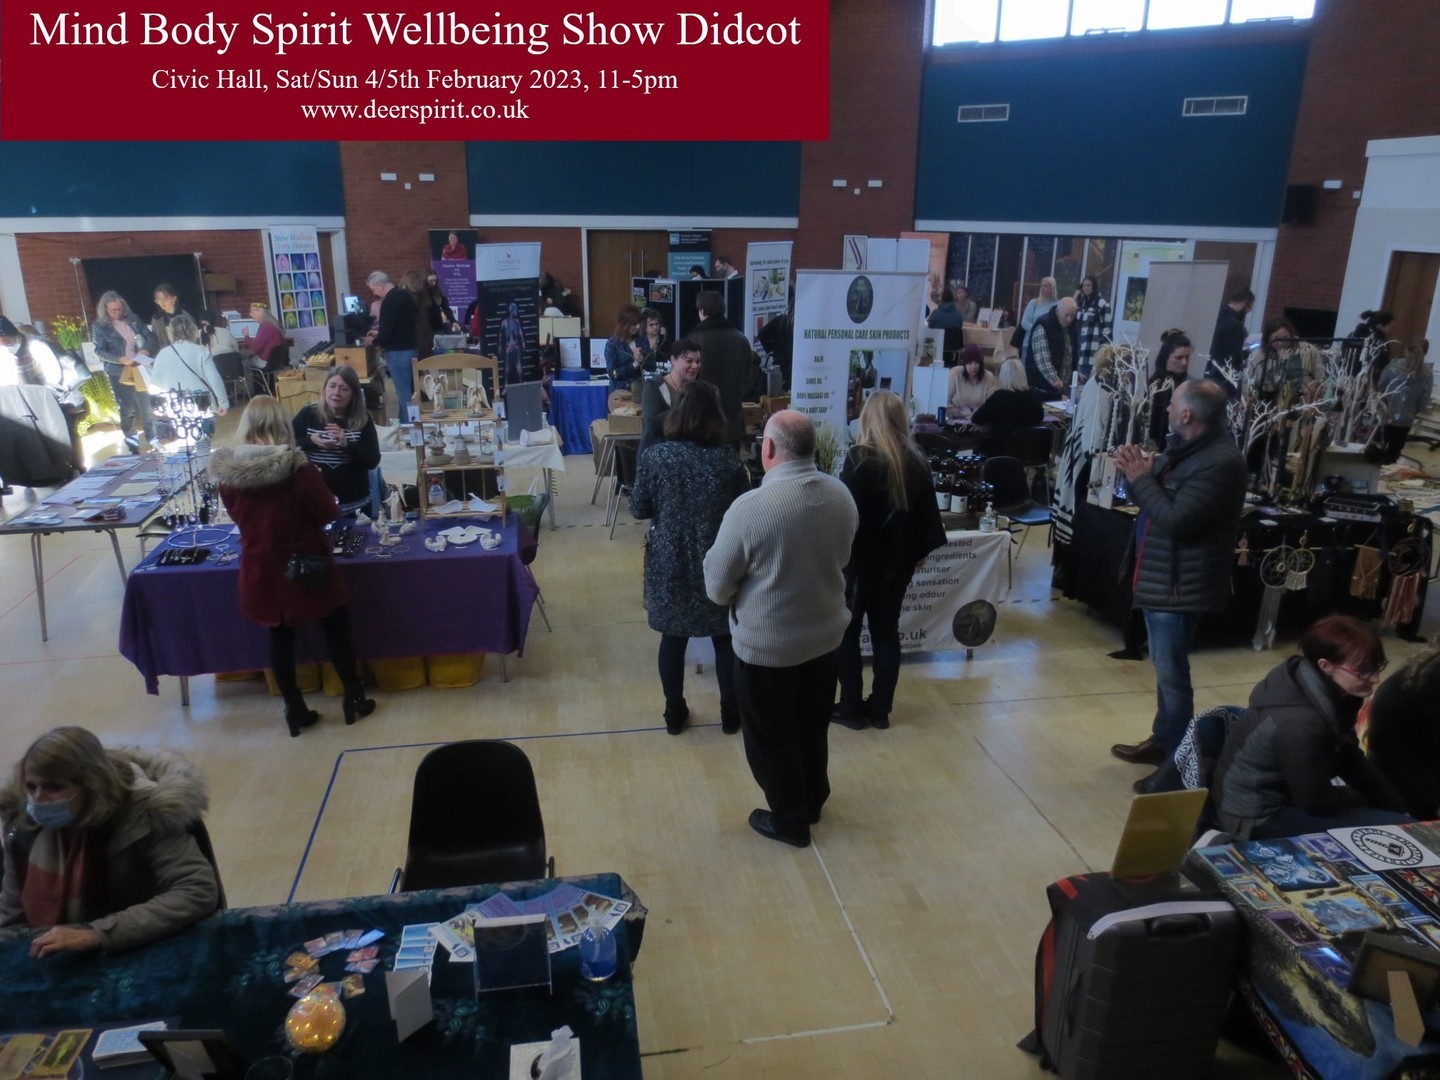 Mind Body Spirit Wellbeing Show - Didcot, Didcot, Oxfordshire, United Kingdom